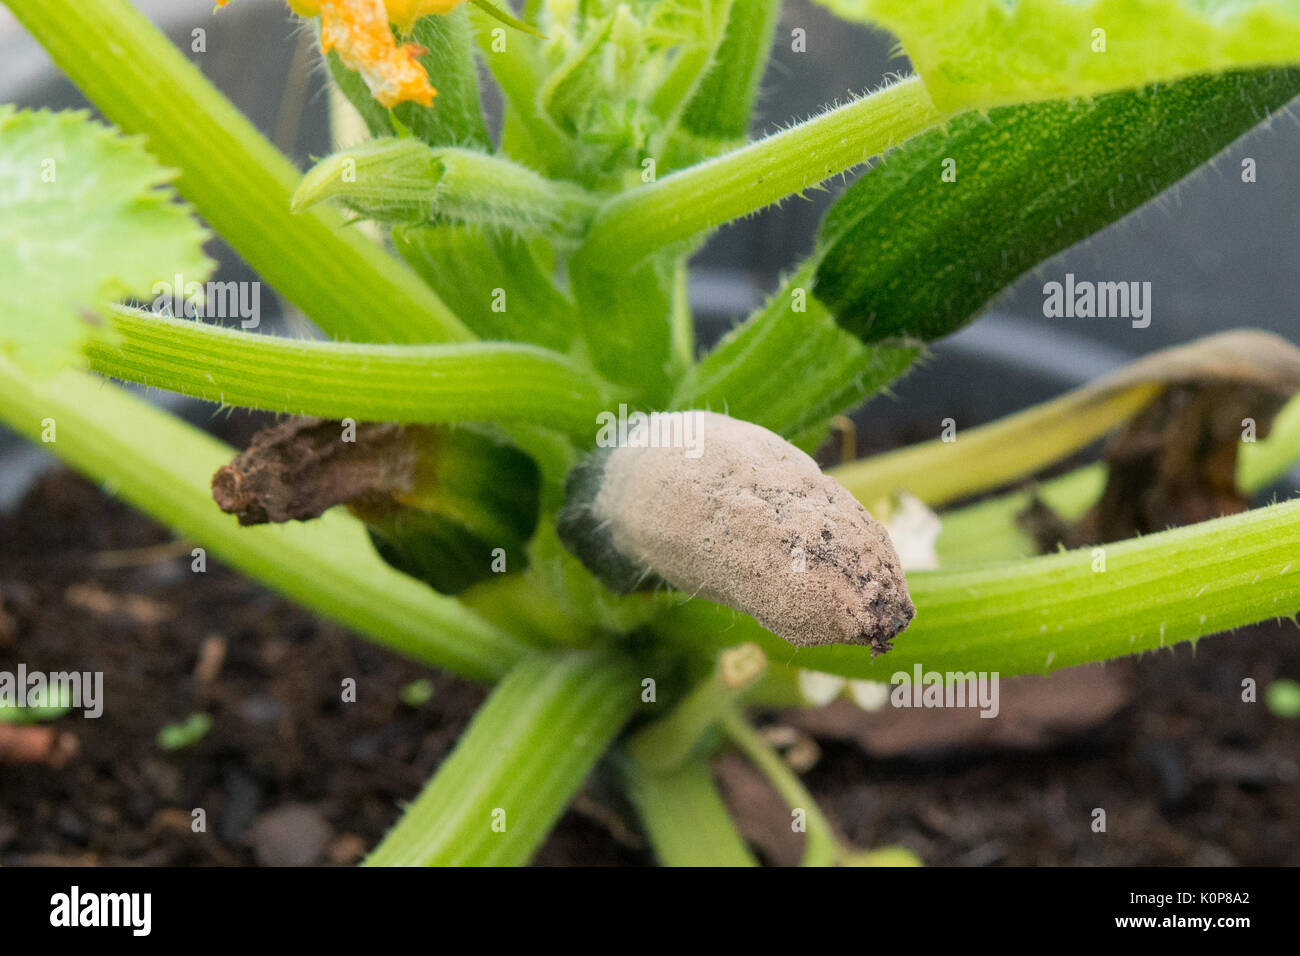 Grey mould - Botrytis cinerea - on courgette plant Stock Photo